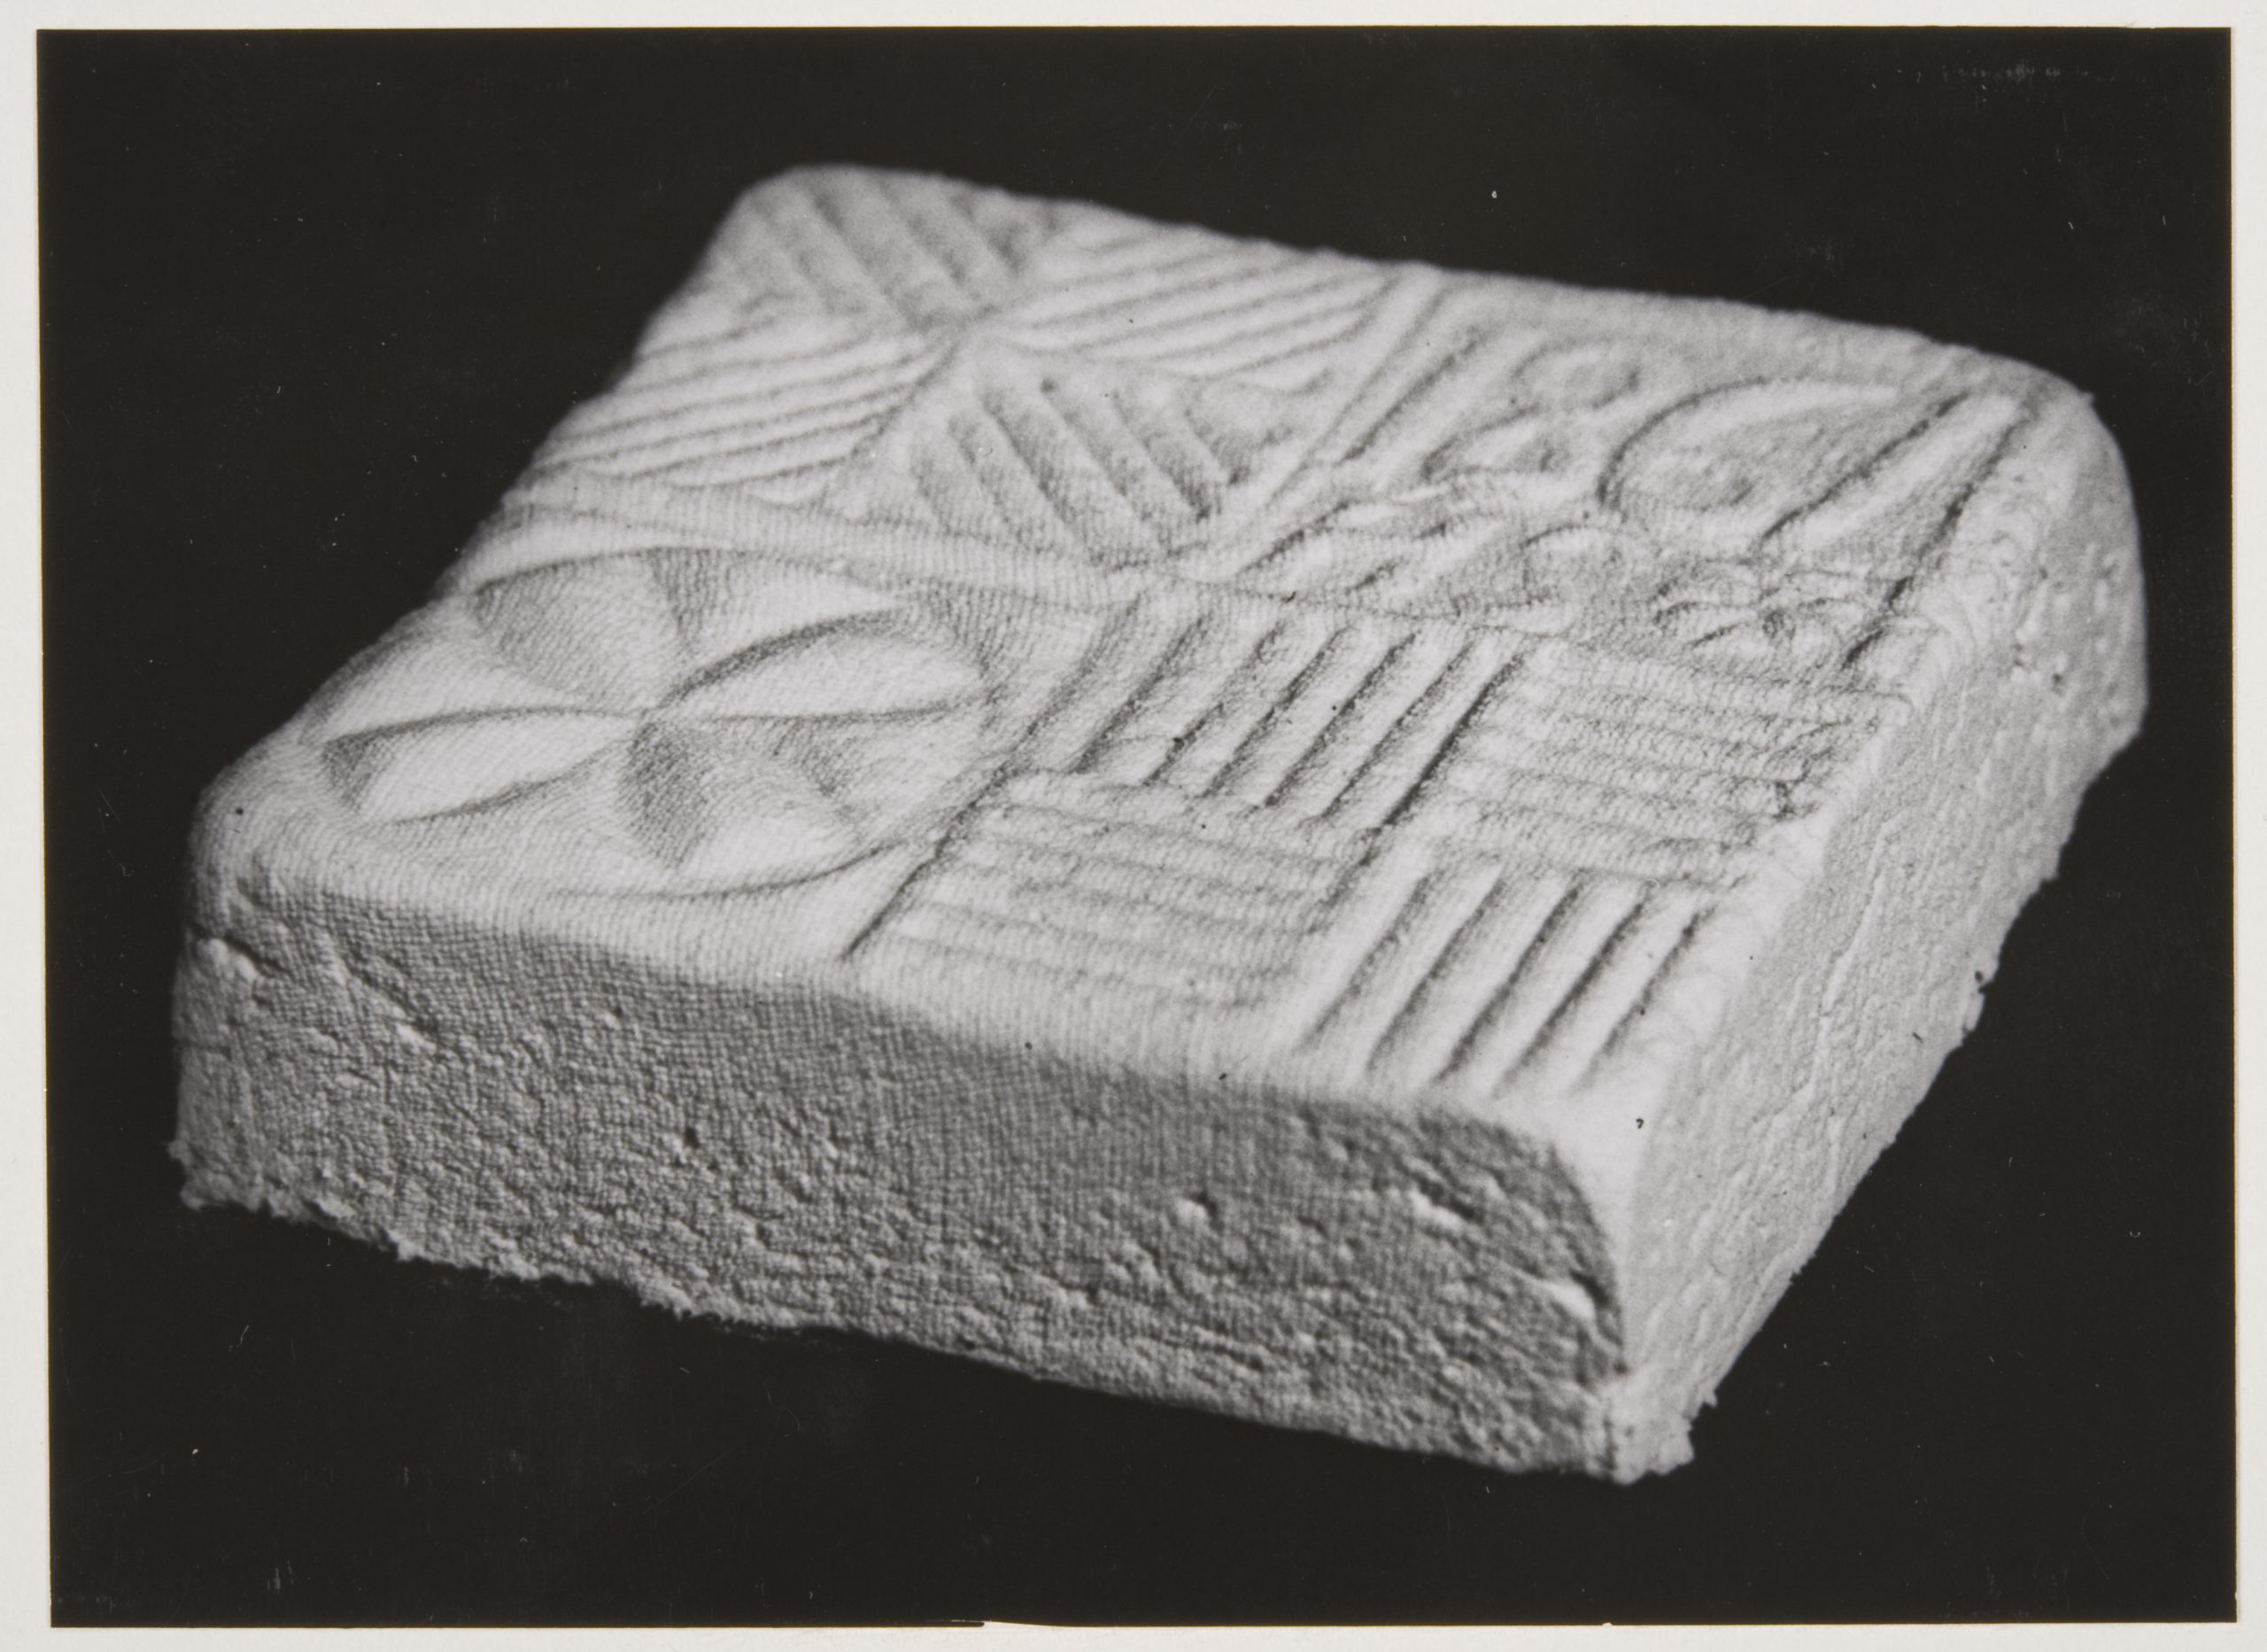 A black-and-white photo of cheese made with a mould. The cheese is square-shaped and low in height. The pattern carved at the bottom of the mould is visible on the top surface of the cheese.